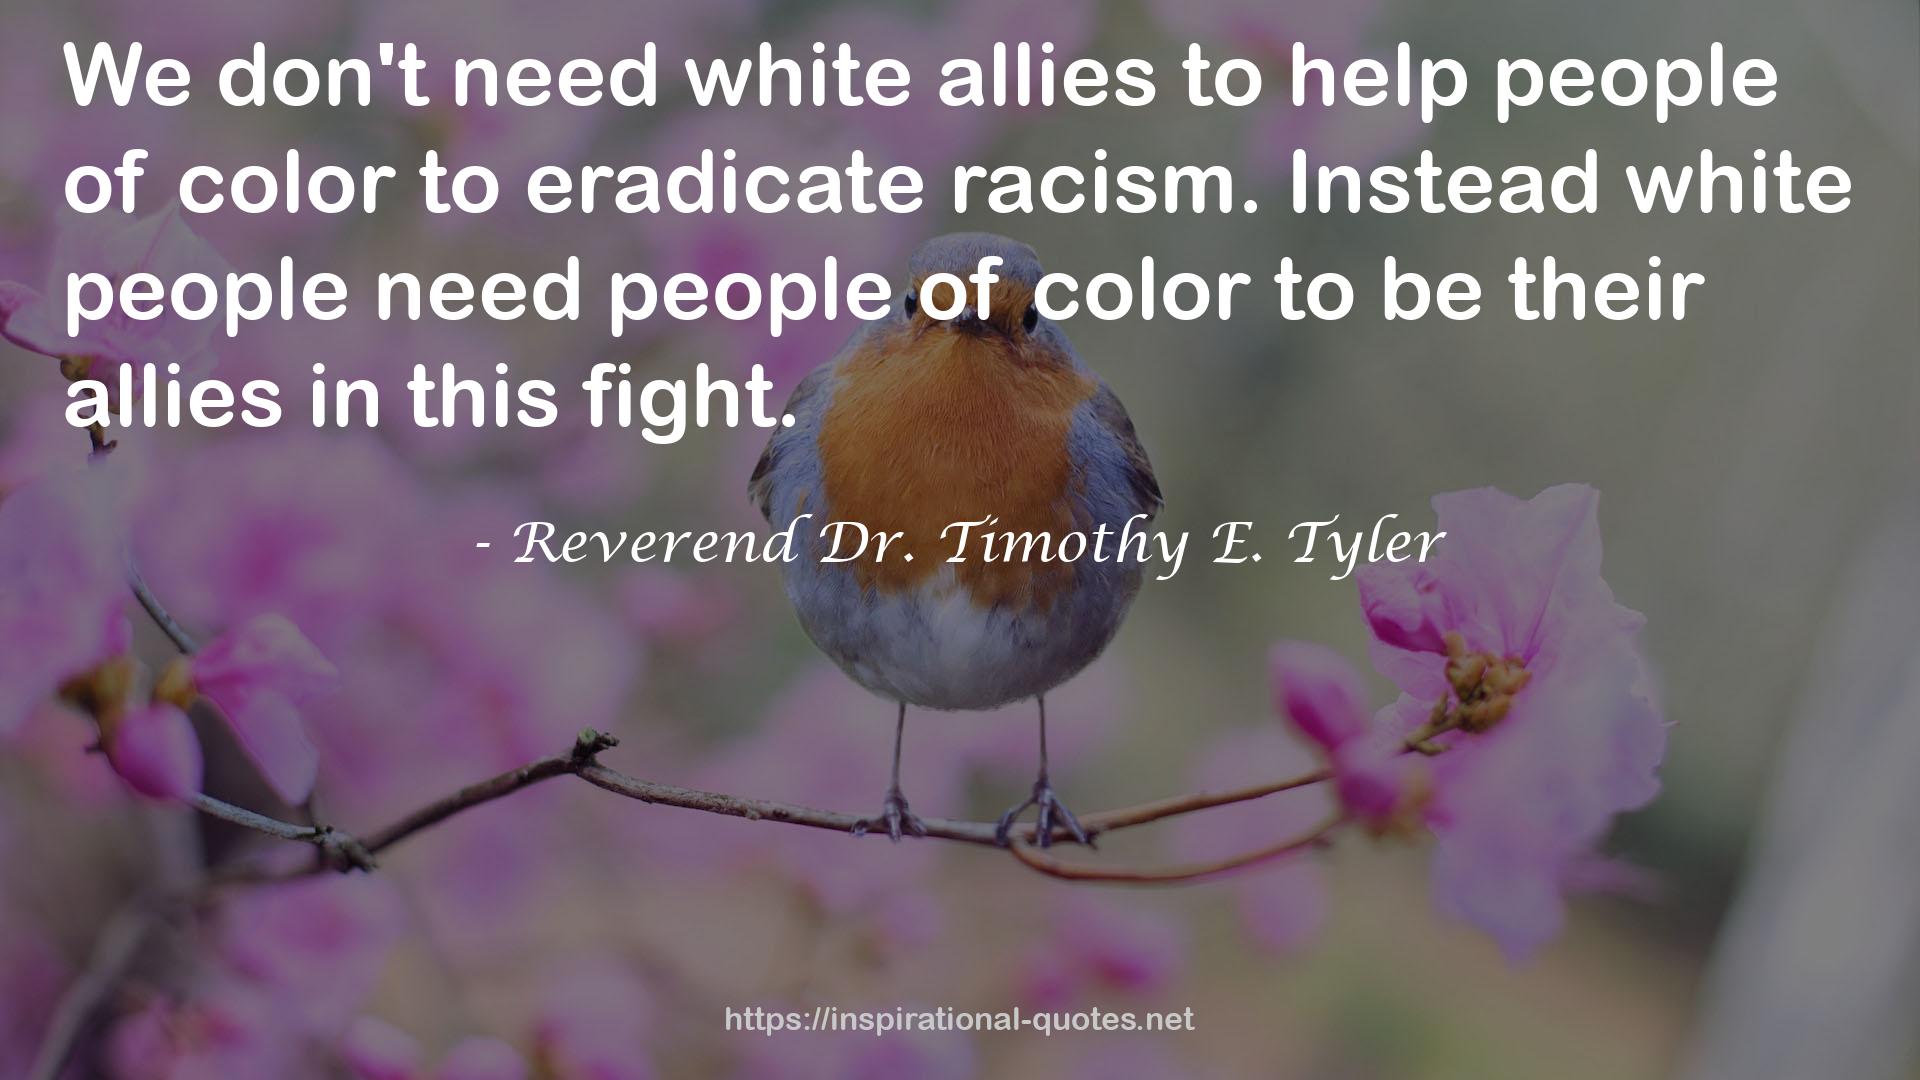 Reverend Dr. Timothy E. Tyler QUOTES